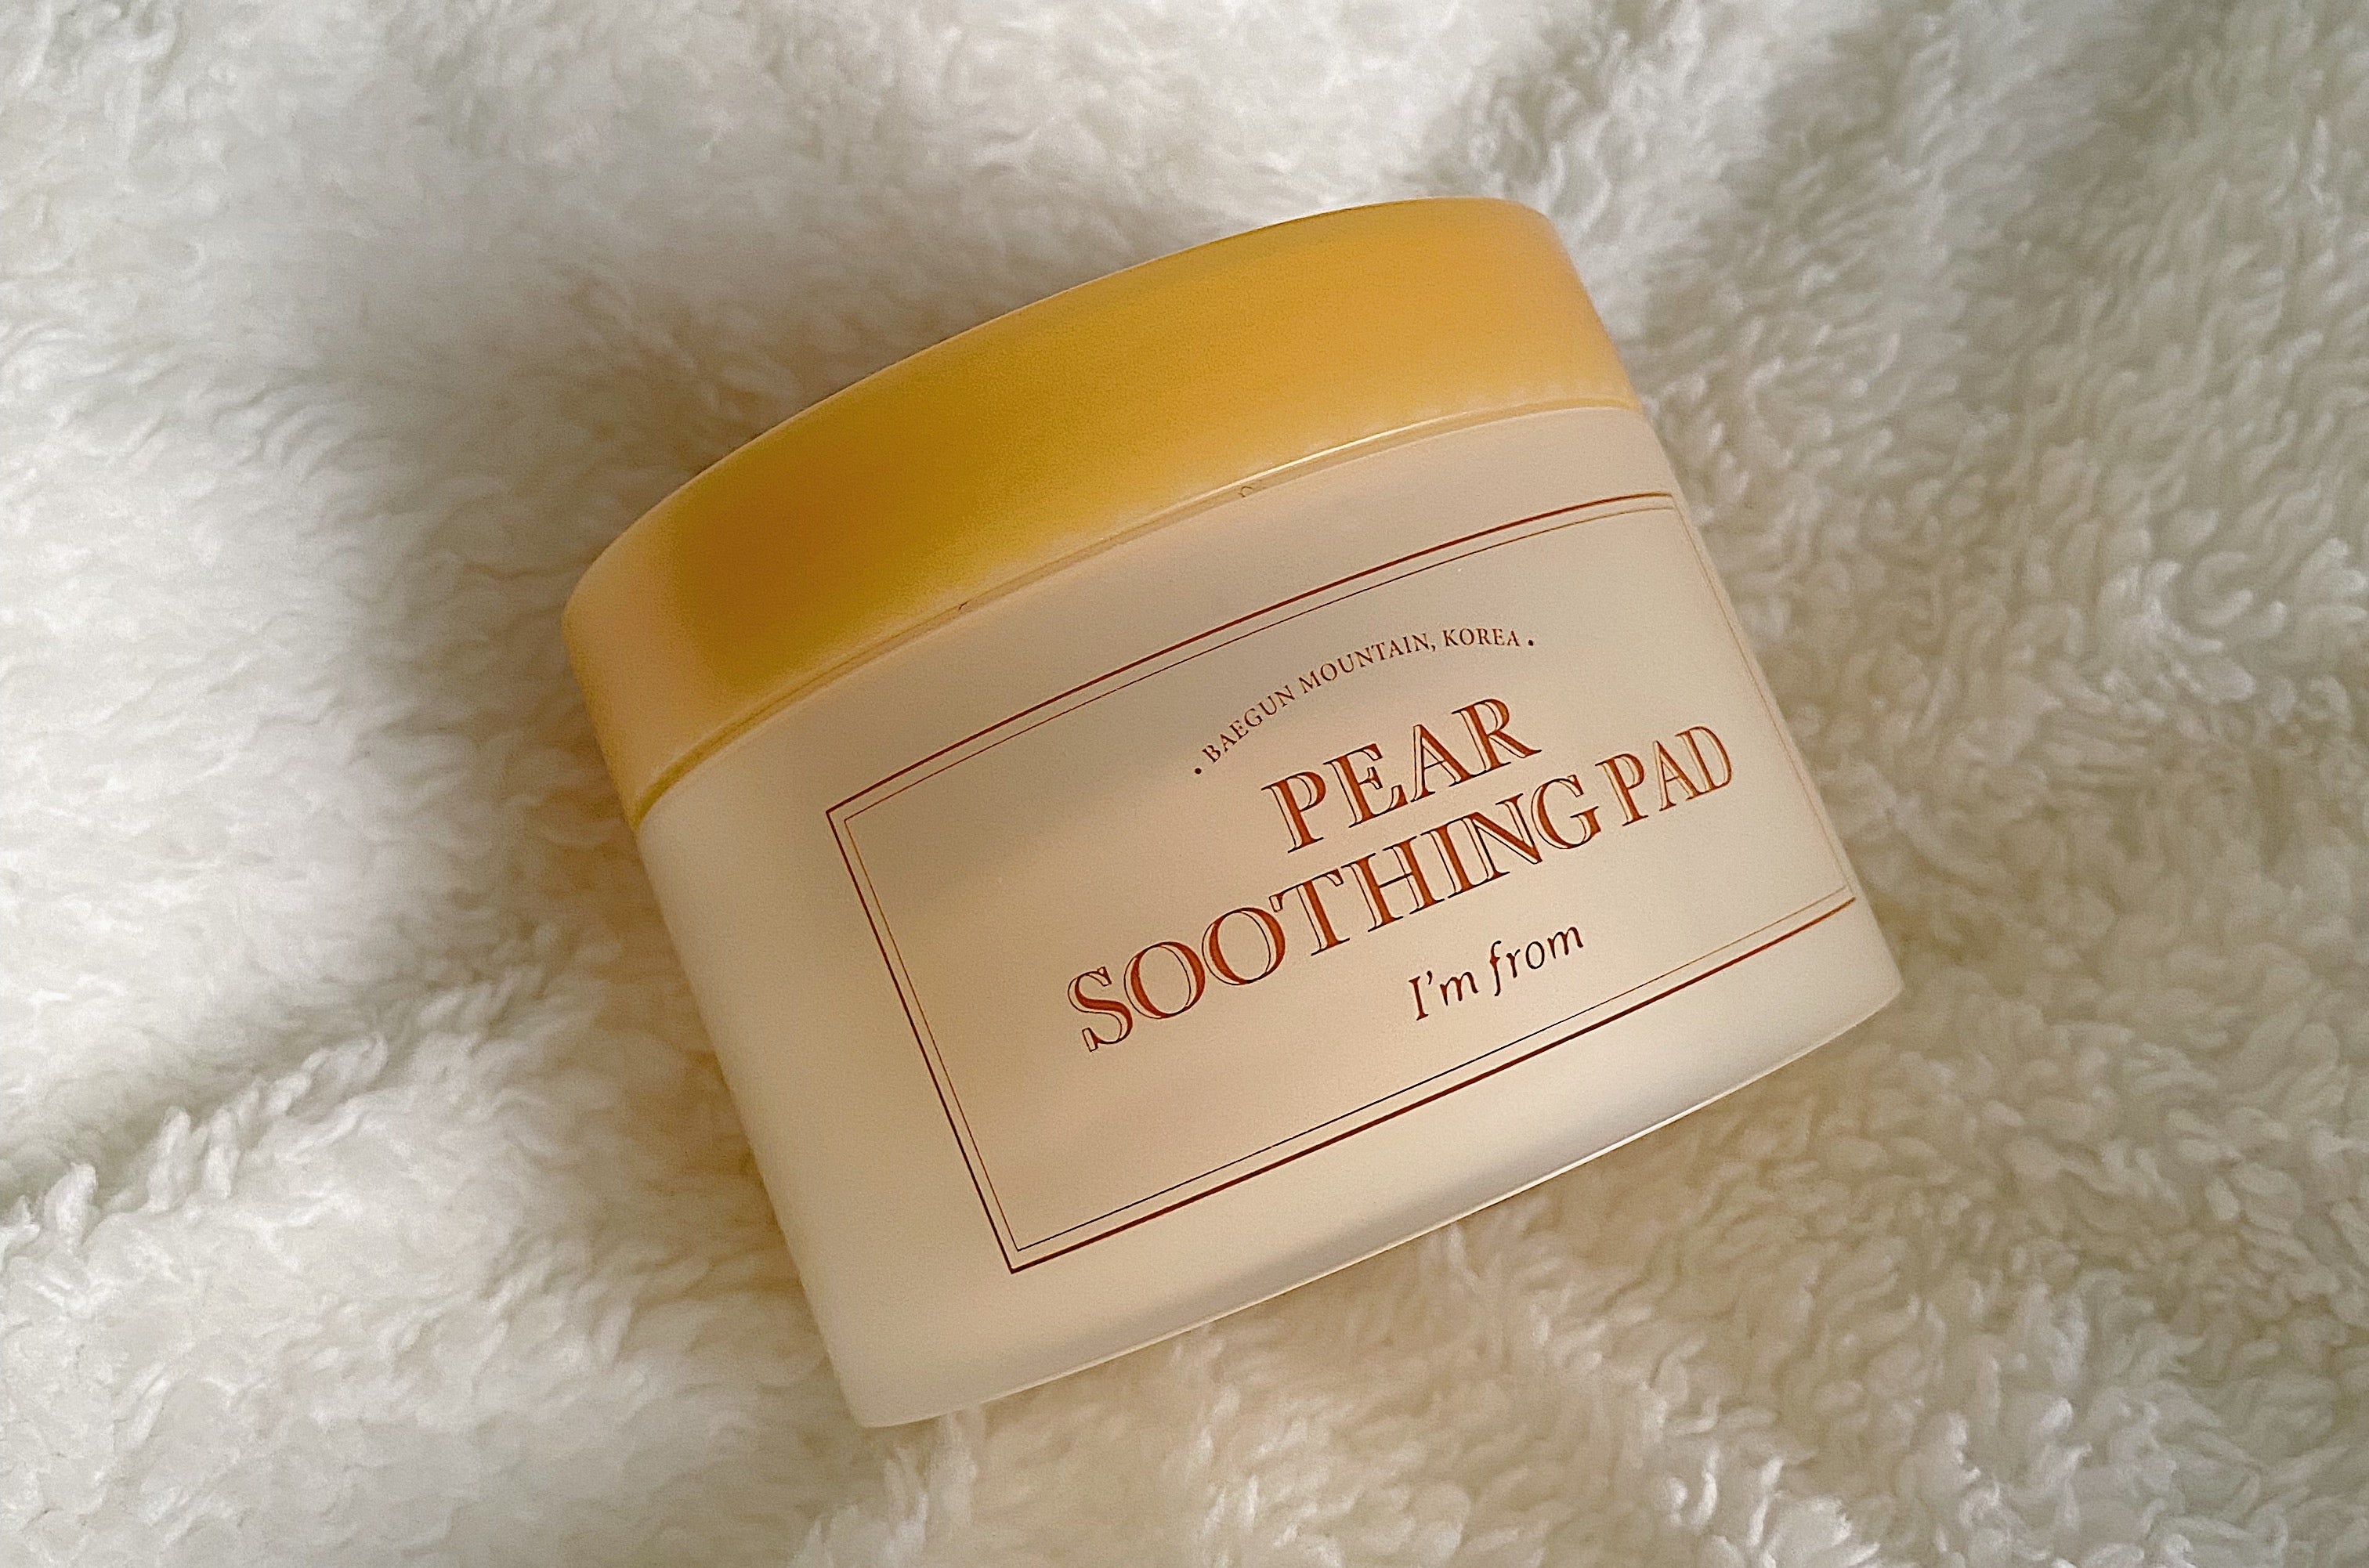 HI-REVIEW: I’m From Pear Soothing Pad